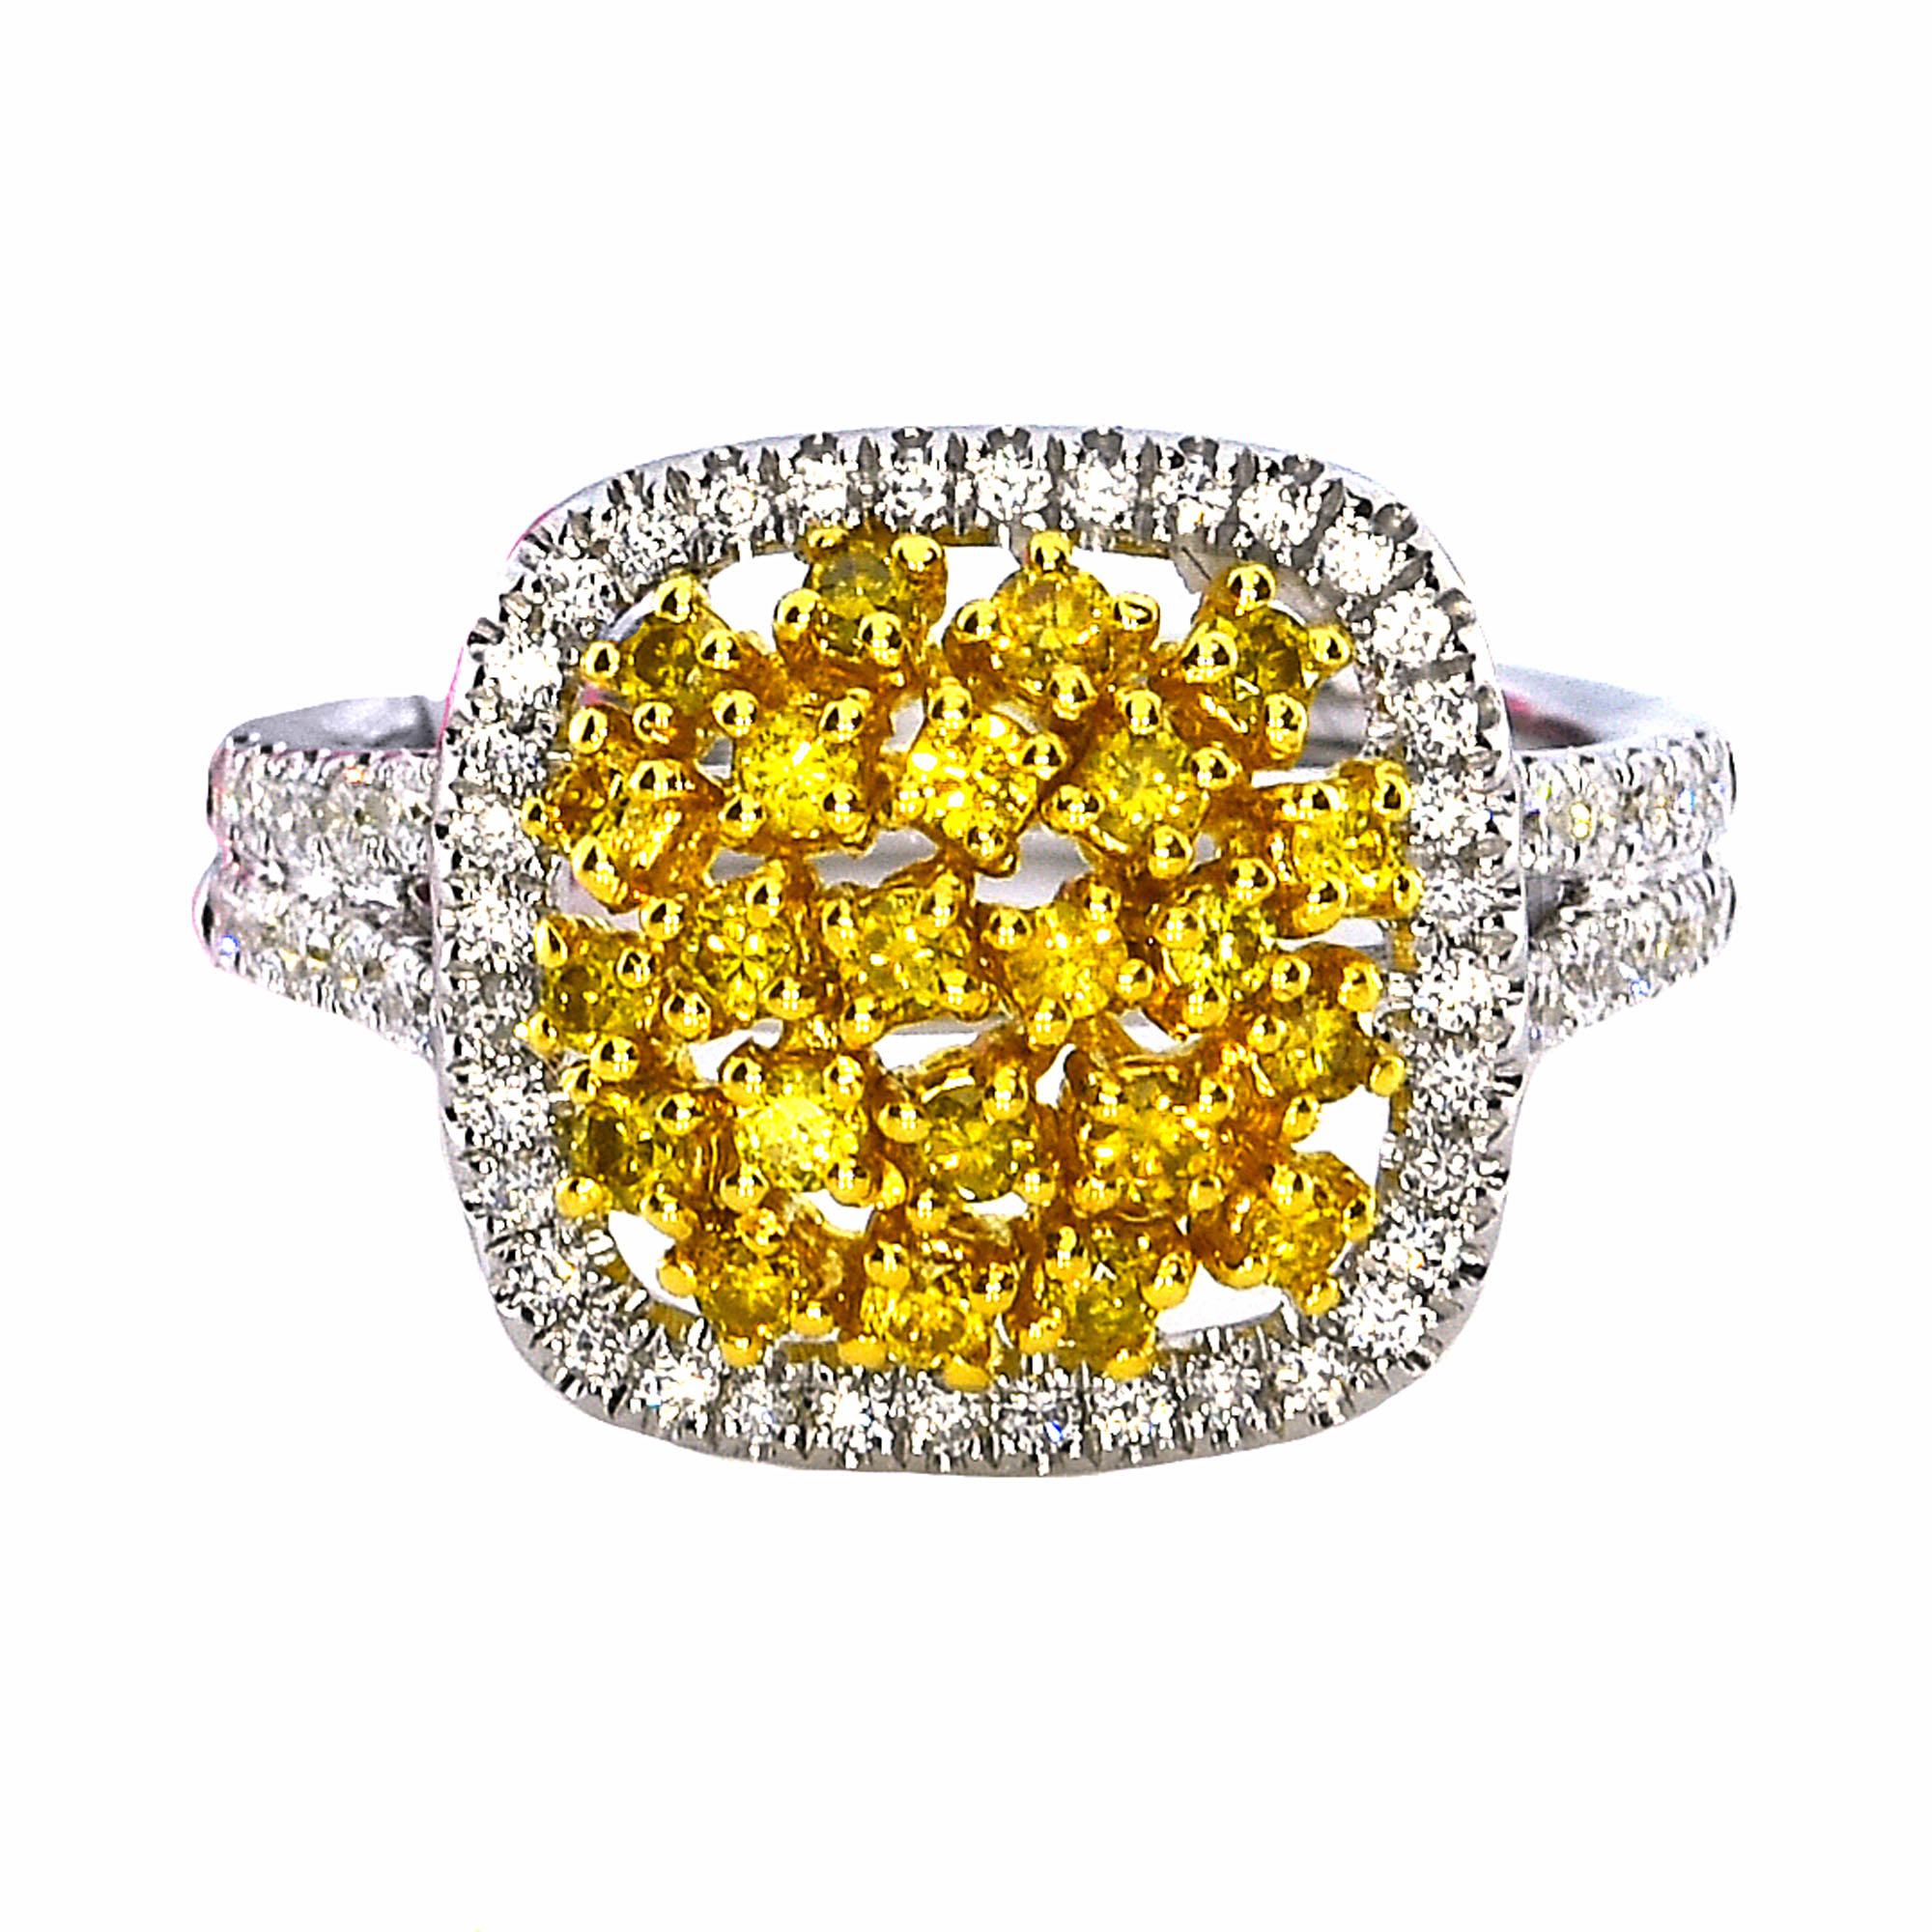 Round Cut 0.99 Carat Natural Fancy Intense Yellow Diamond Cluster Ring For Sale